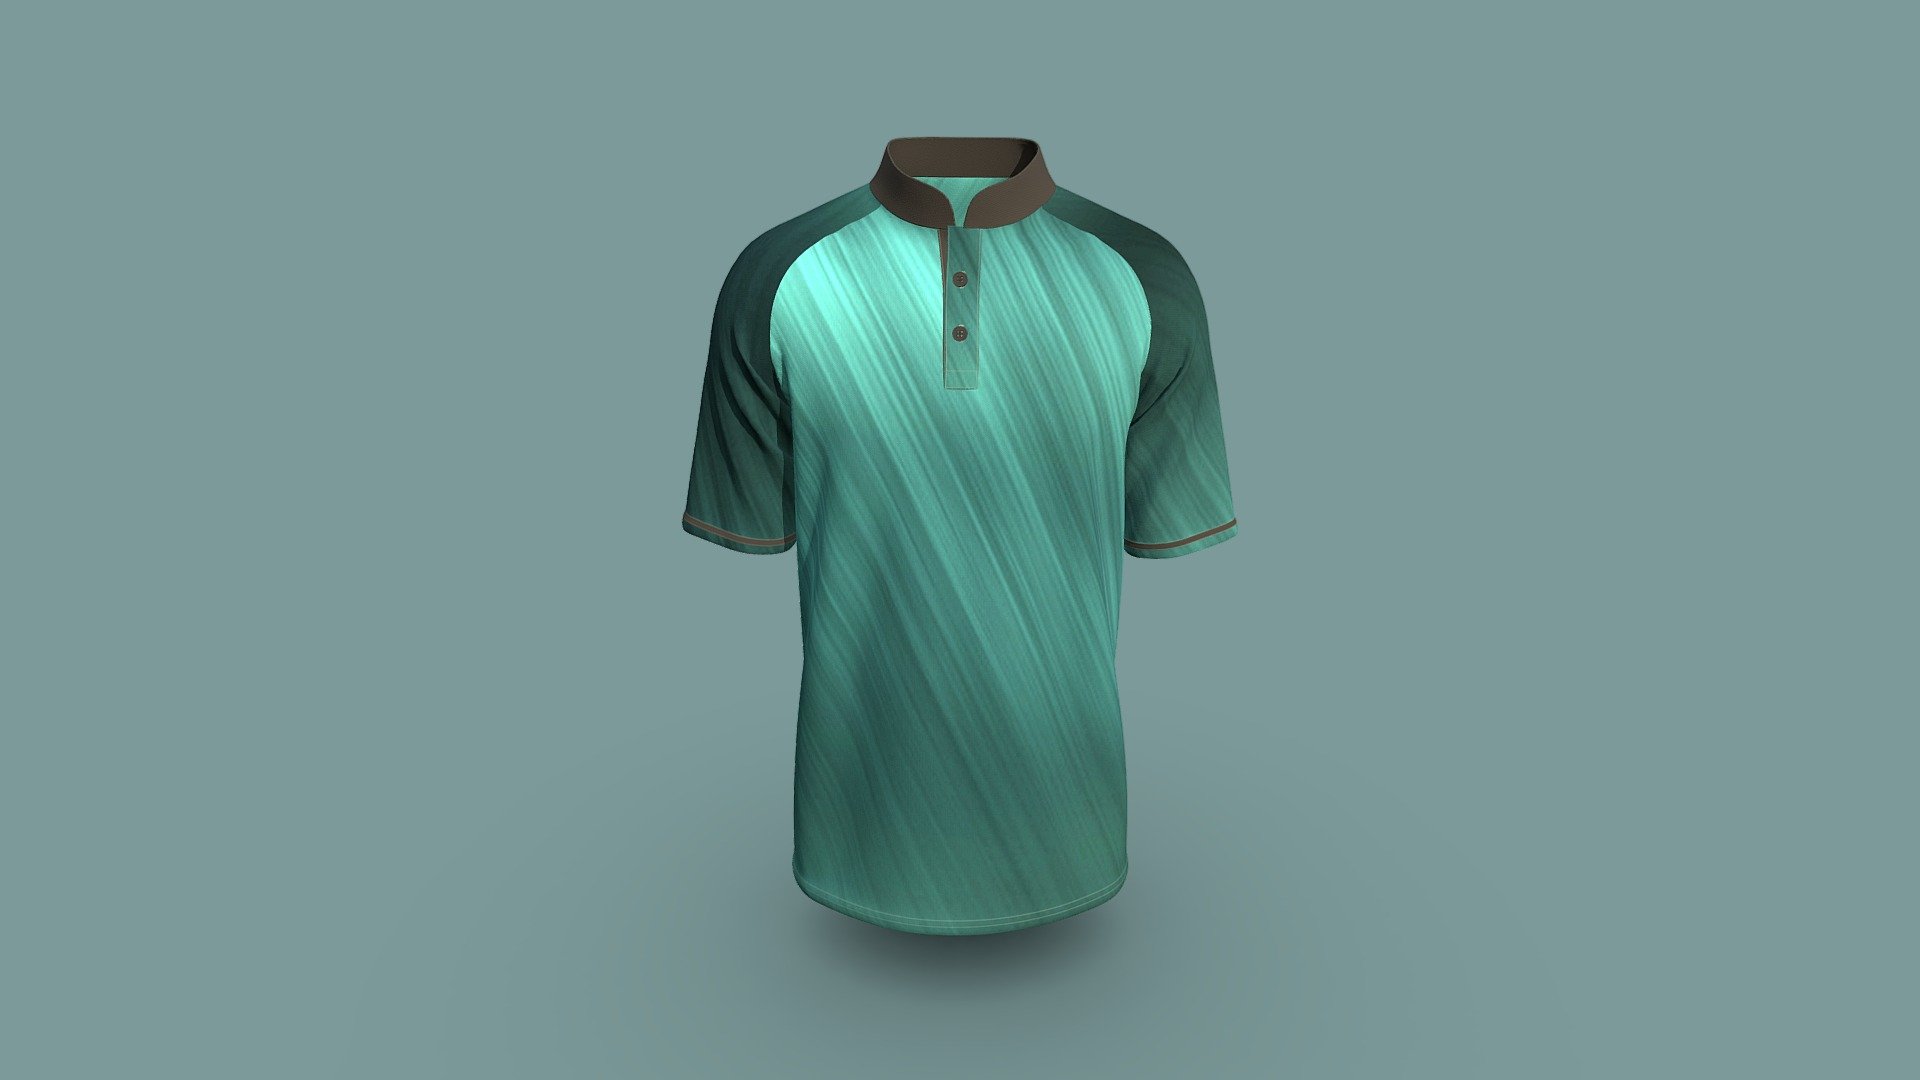 Cloth Title = Sporty Polo Design 

SKU = DG100203 

Category = Men 

Product Type = Polo 

Cloth Length = Regular 

Body Fit = Regular Fit 

Occasion = Casual 

Sleeve Style = Raglan Sleeve 


Our Services:

3D Apparel Design.

OBJ,FBX,GLTF Making with High/Low Poly.

Fabric Digitalization.

Mockup making.

3D Teck Pack.

Pattern Making.

2D Illustration.

Cloth Animation and 360 Spin Video.


Contact us:- 

Email: info@digitalfashionwear.com 

Website: https://digitalfashionwear.com 


We designed all the types of cloth specially focused on product visualization, e-commerce, fitting, and production. 

We will design: 

T-shirts 

Polo shirts 

Hoodies 

Sweatshirt 

Jackets 

Shirts 

TankTops 

Trousers 

Bras 

Underwear 

Blazer 

Aprons 

Leggings 

and All Fashion items. 





Our goal is to make sure what we provide you, meets your demand 3d model